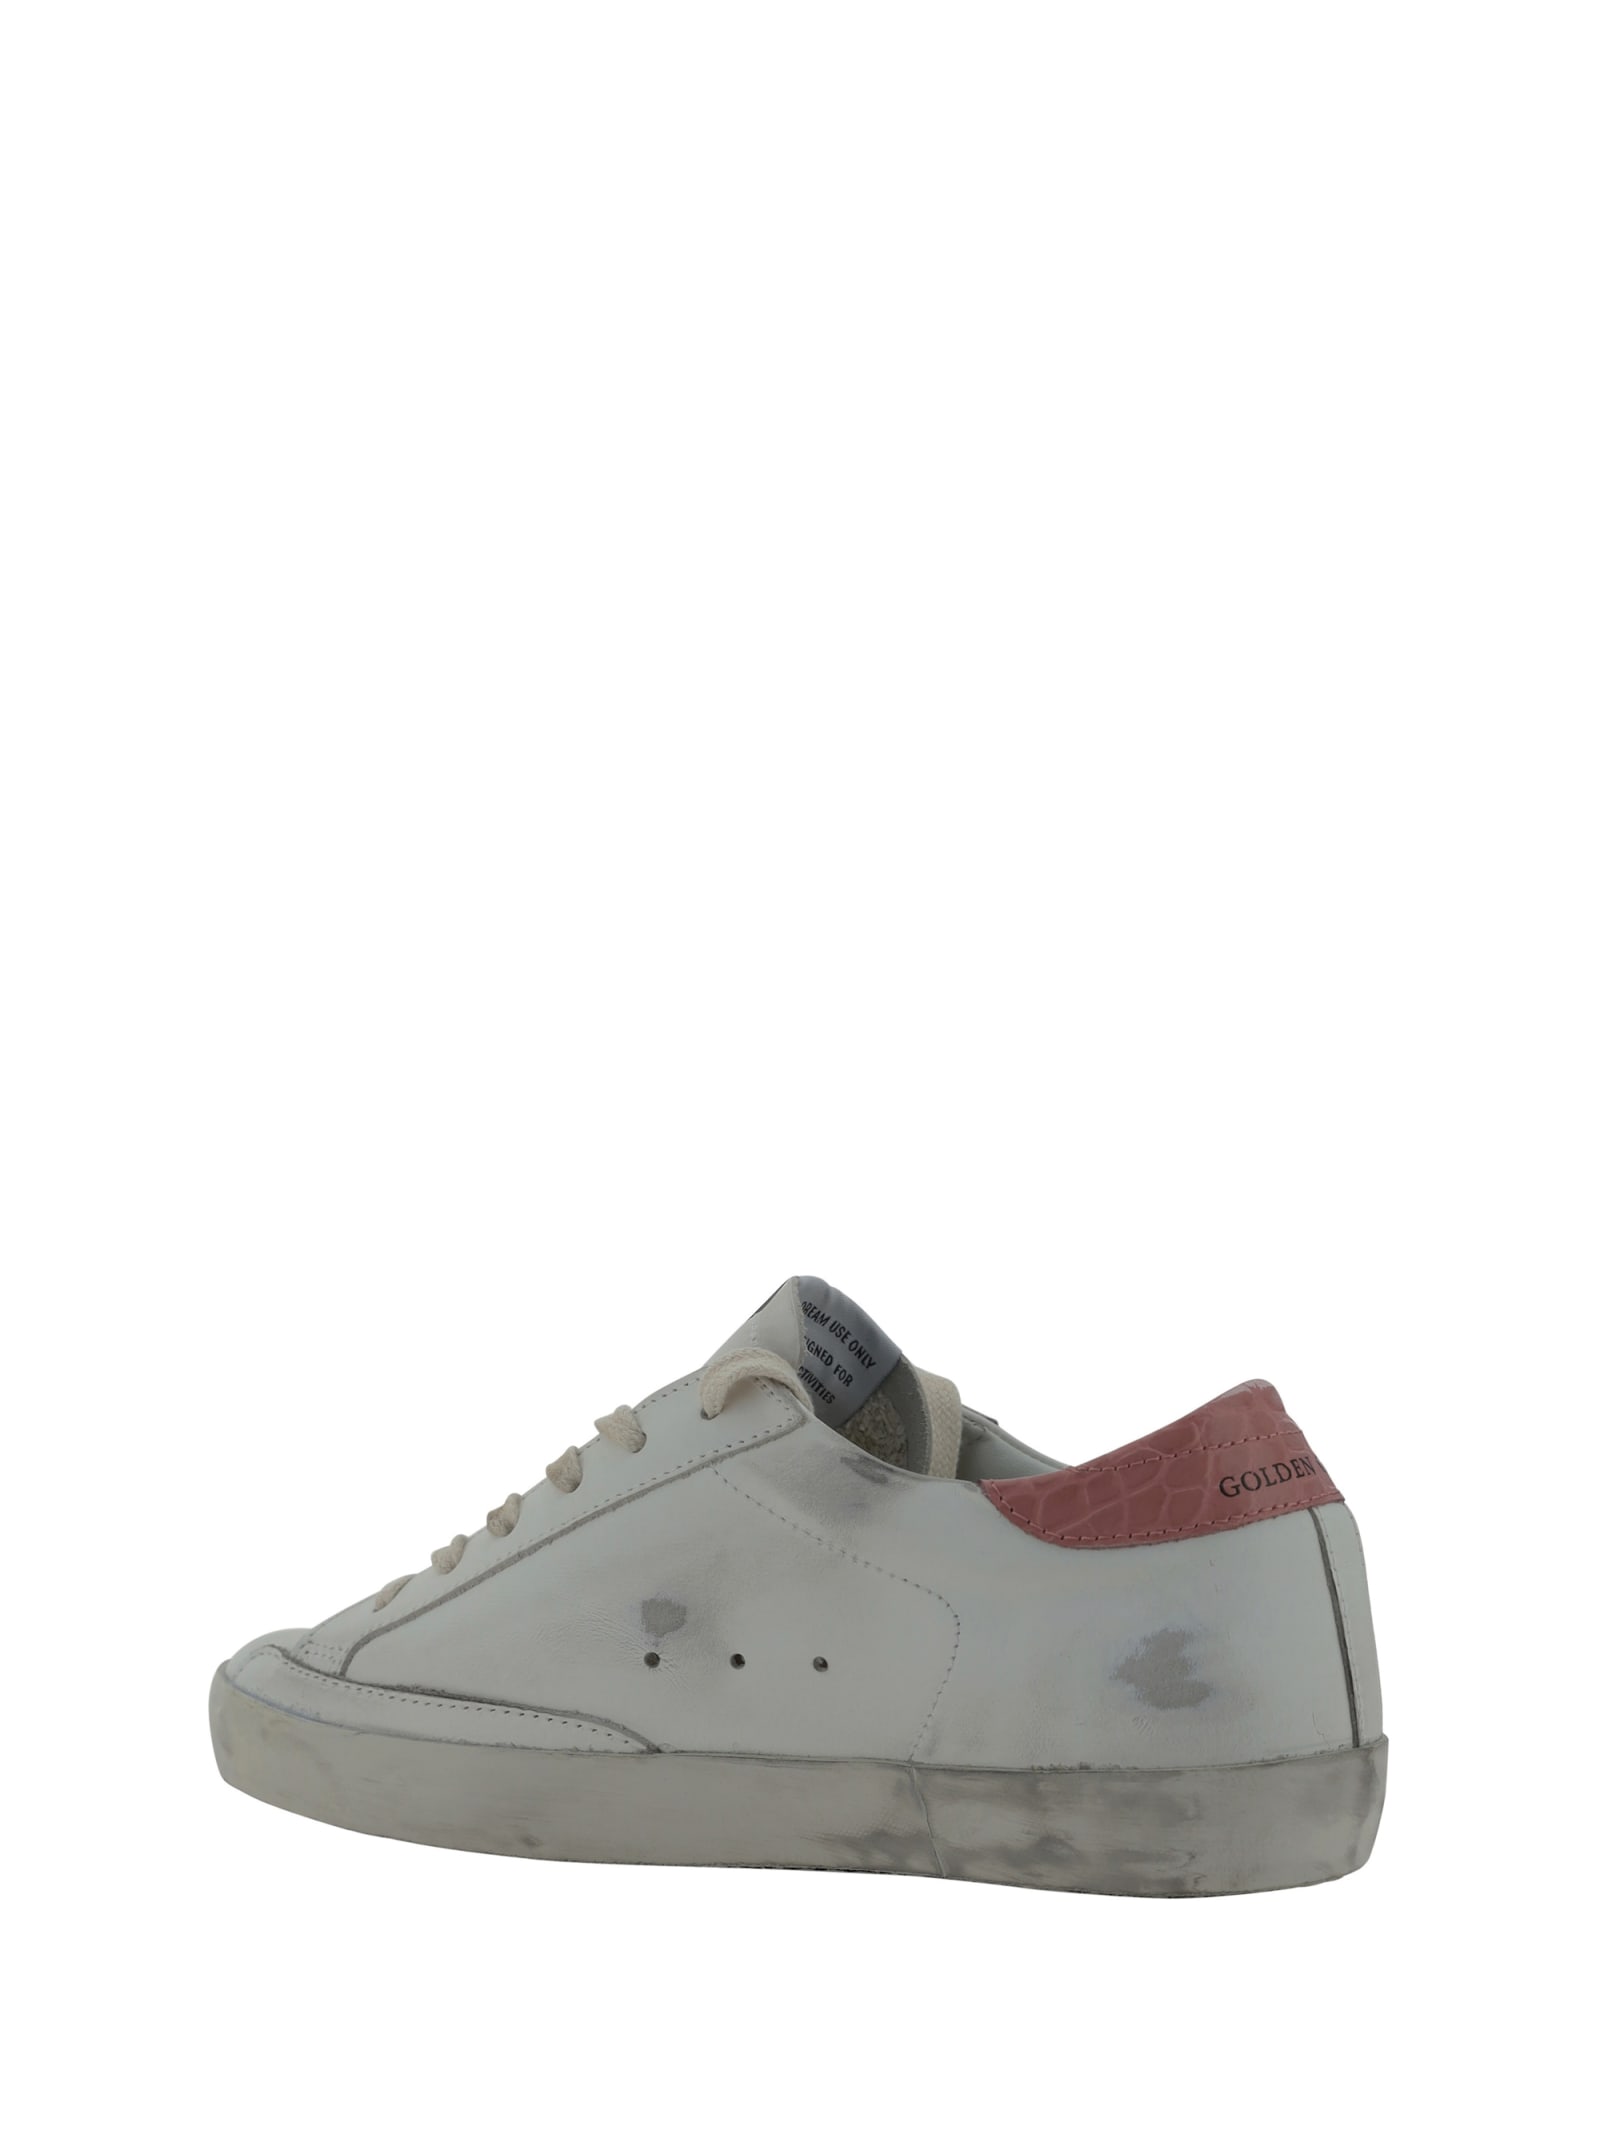 Shop Golden Goose Superstar Sneakers In White/silver/pink